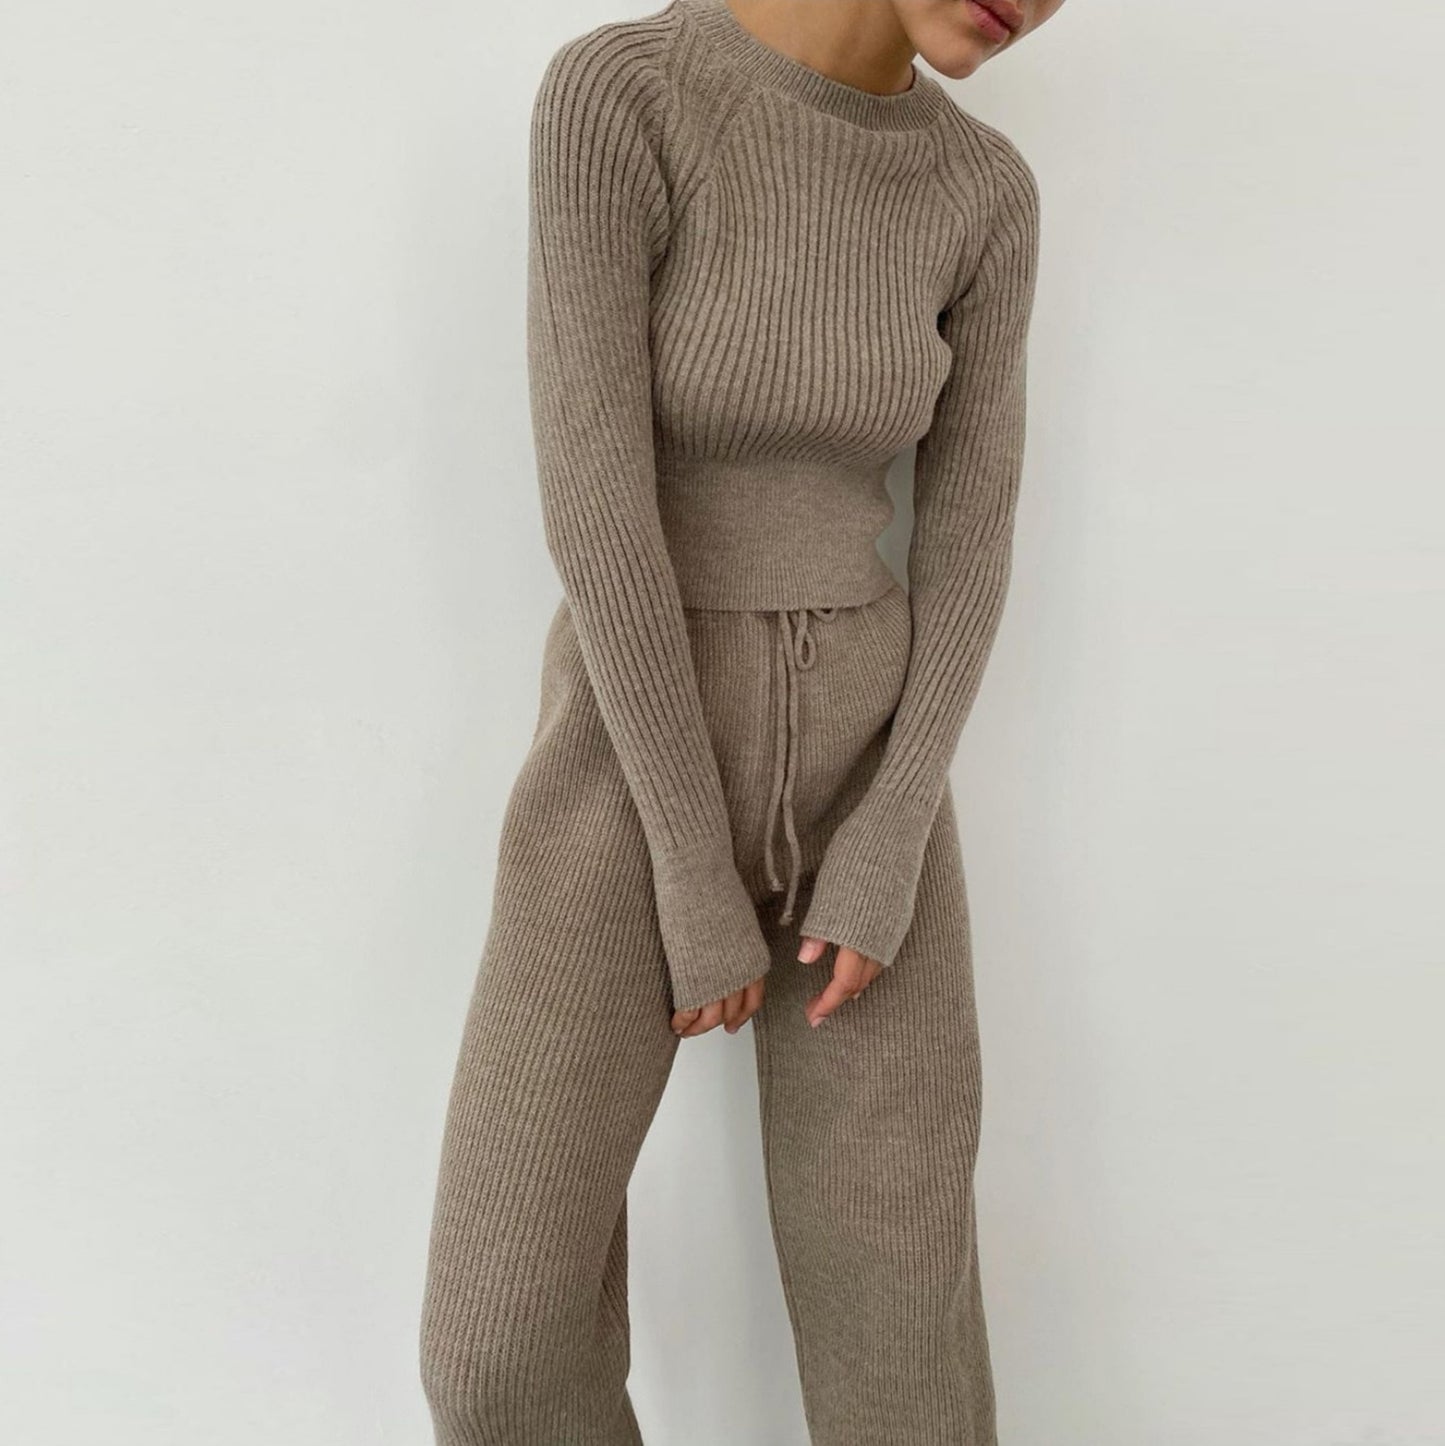 Knitted Top and Pant Two Piece Loungewear Matching Set